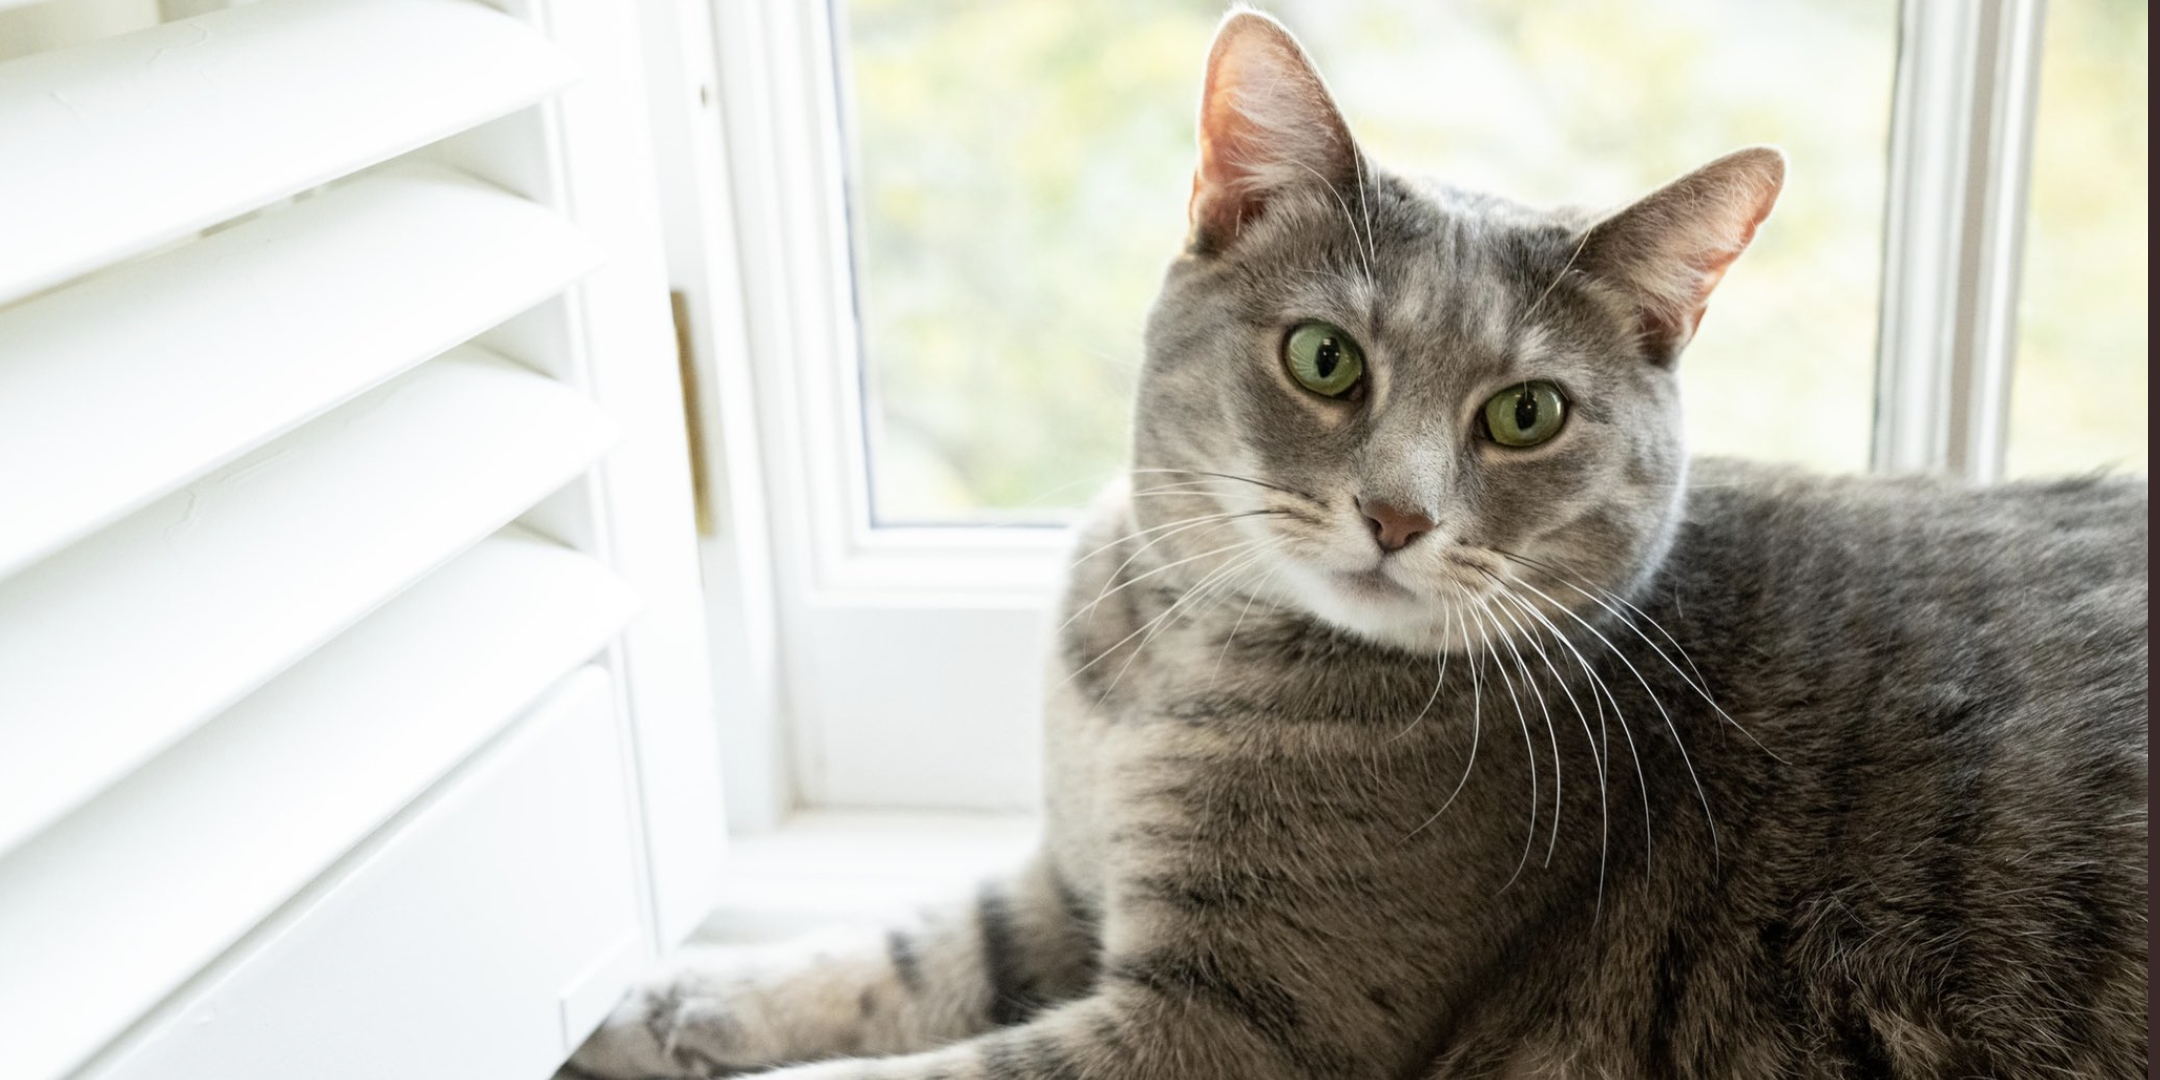 A gray tabby cat with green eyes sits on a windowsill